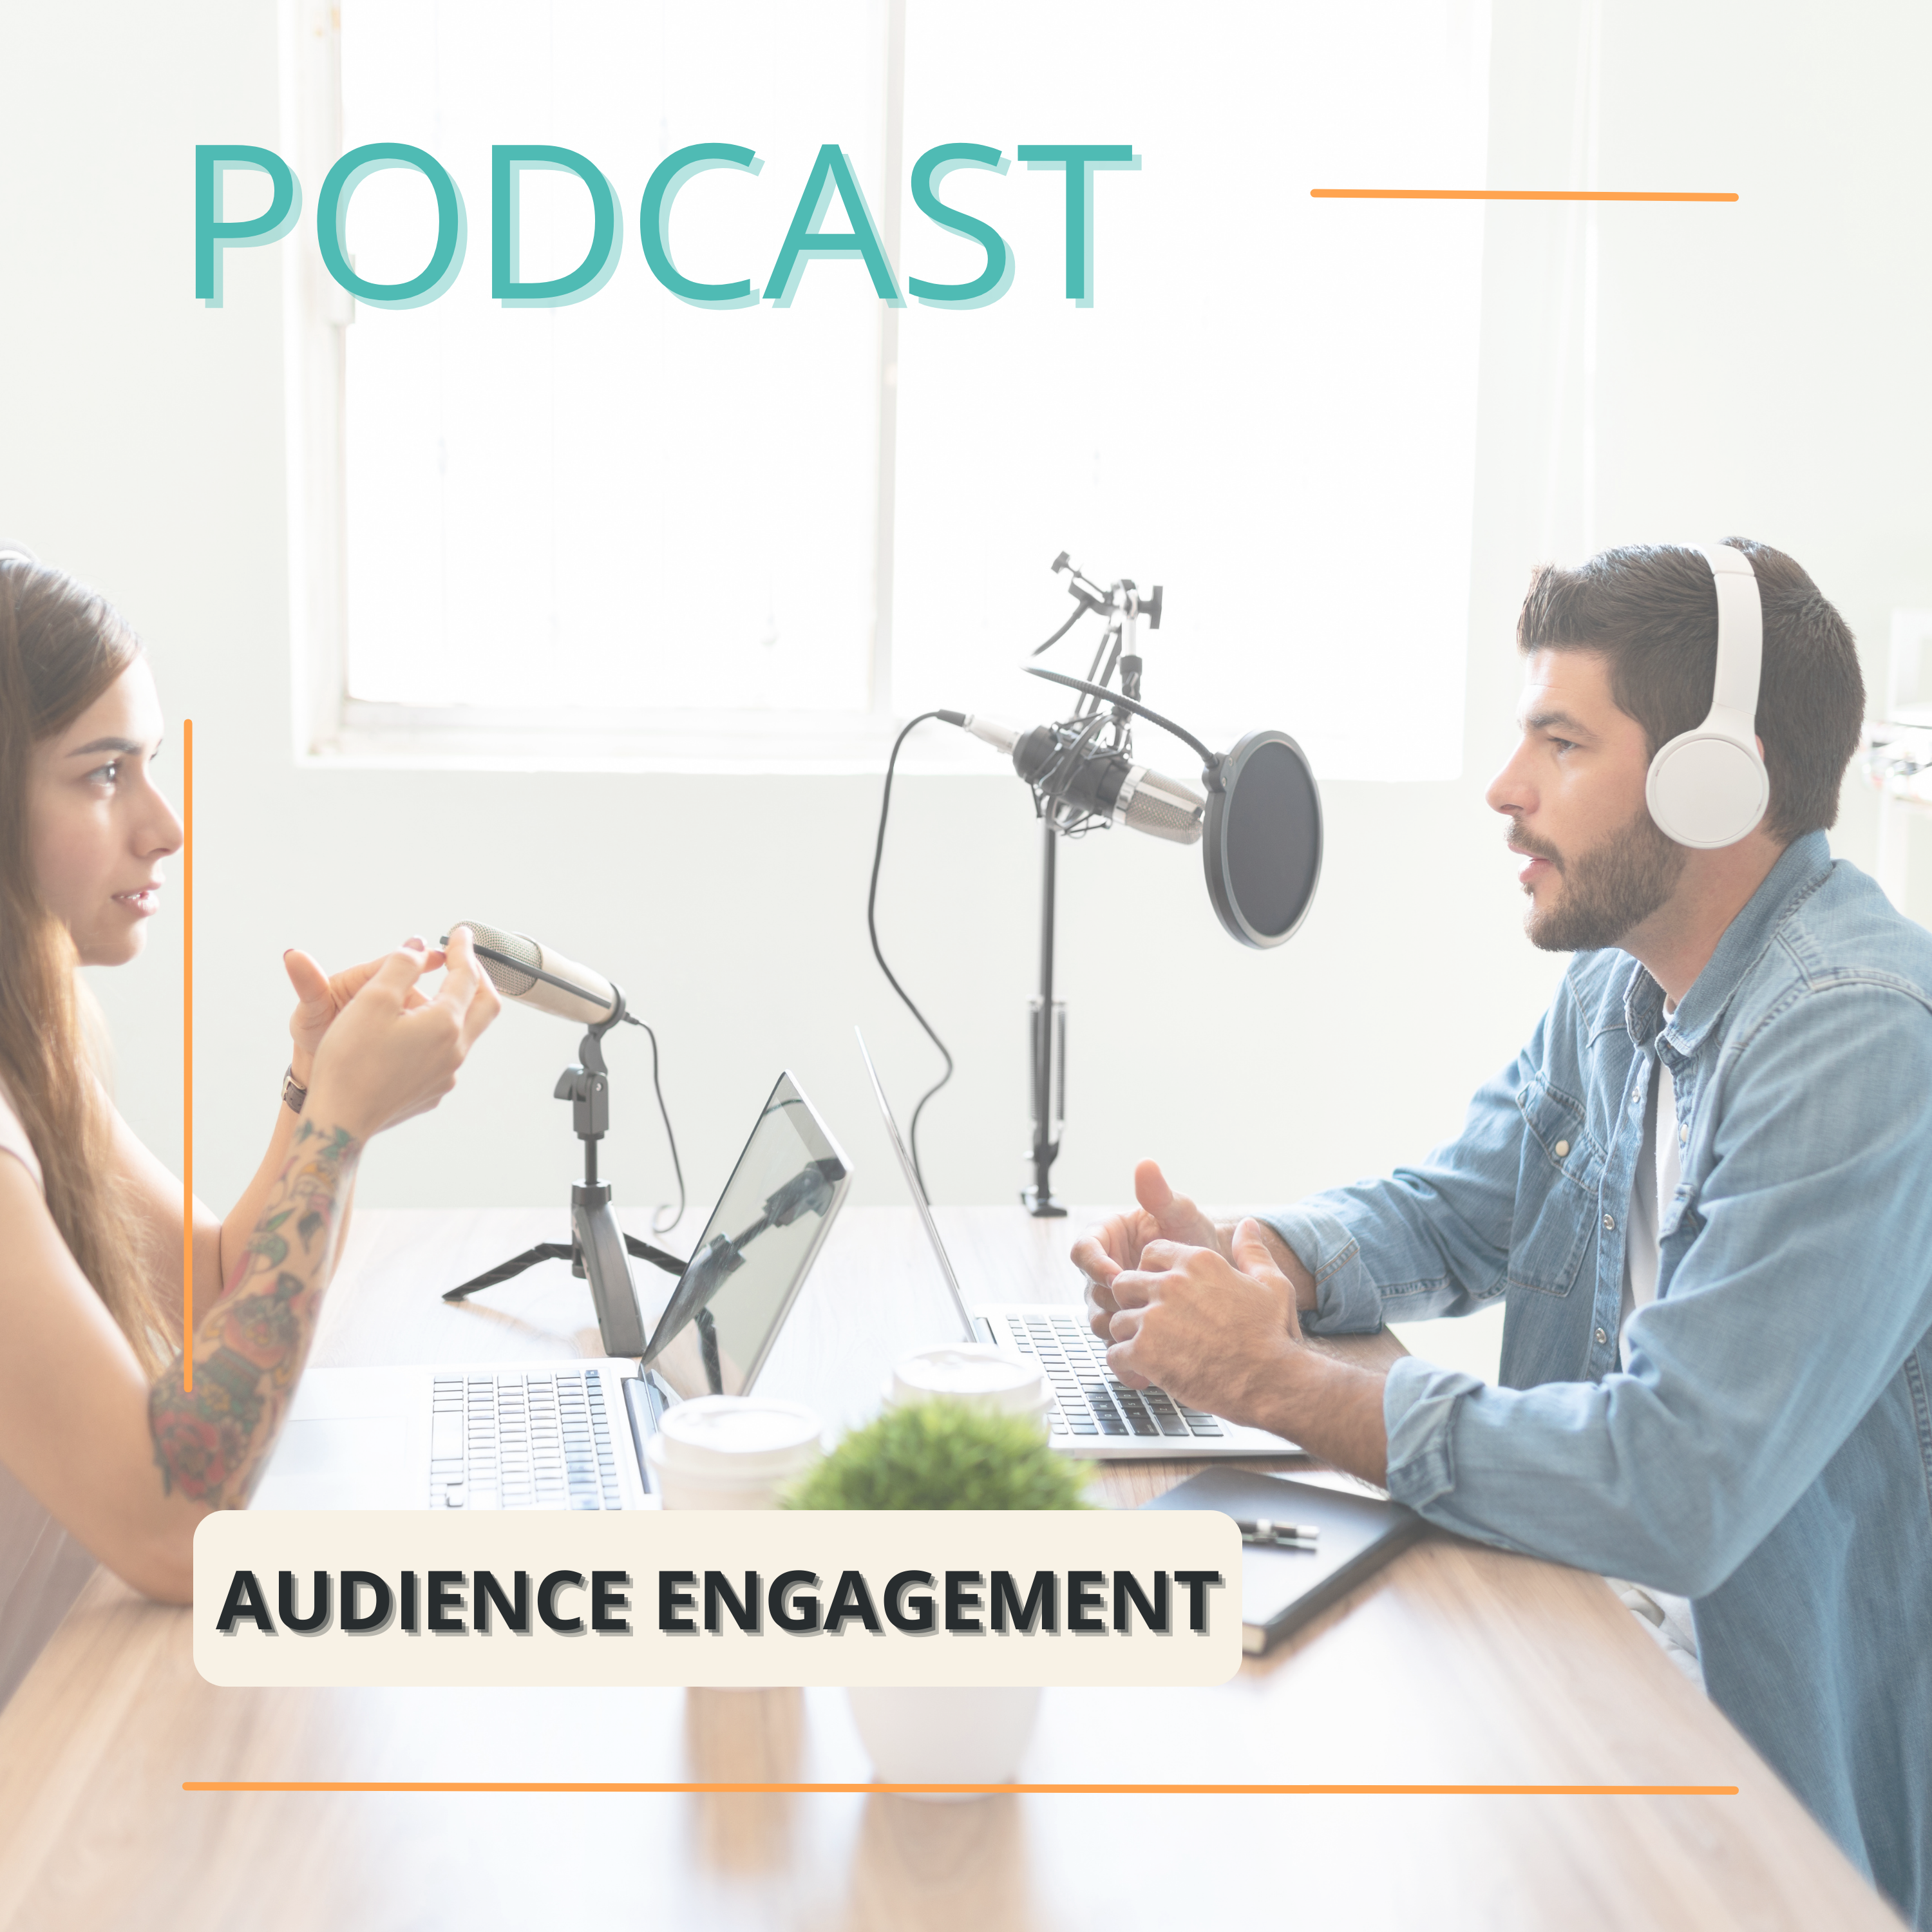 Podcast image to show our services of helping to gain audience engagement by using our services.